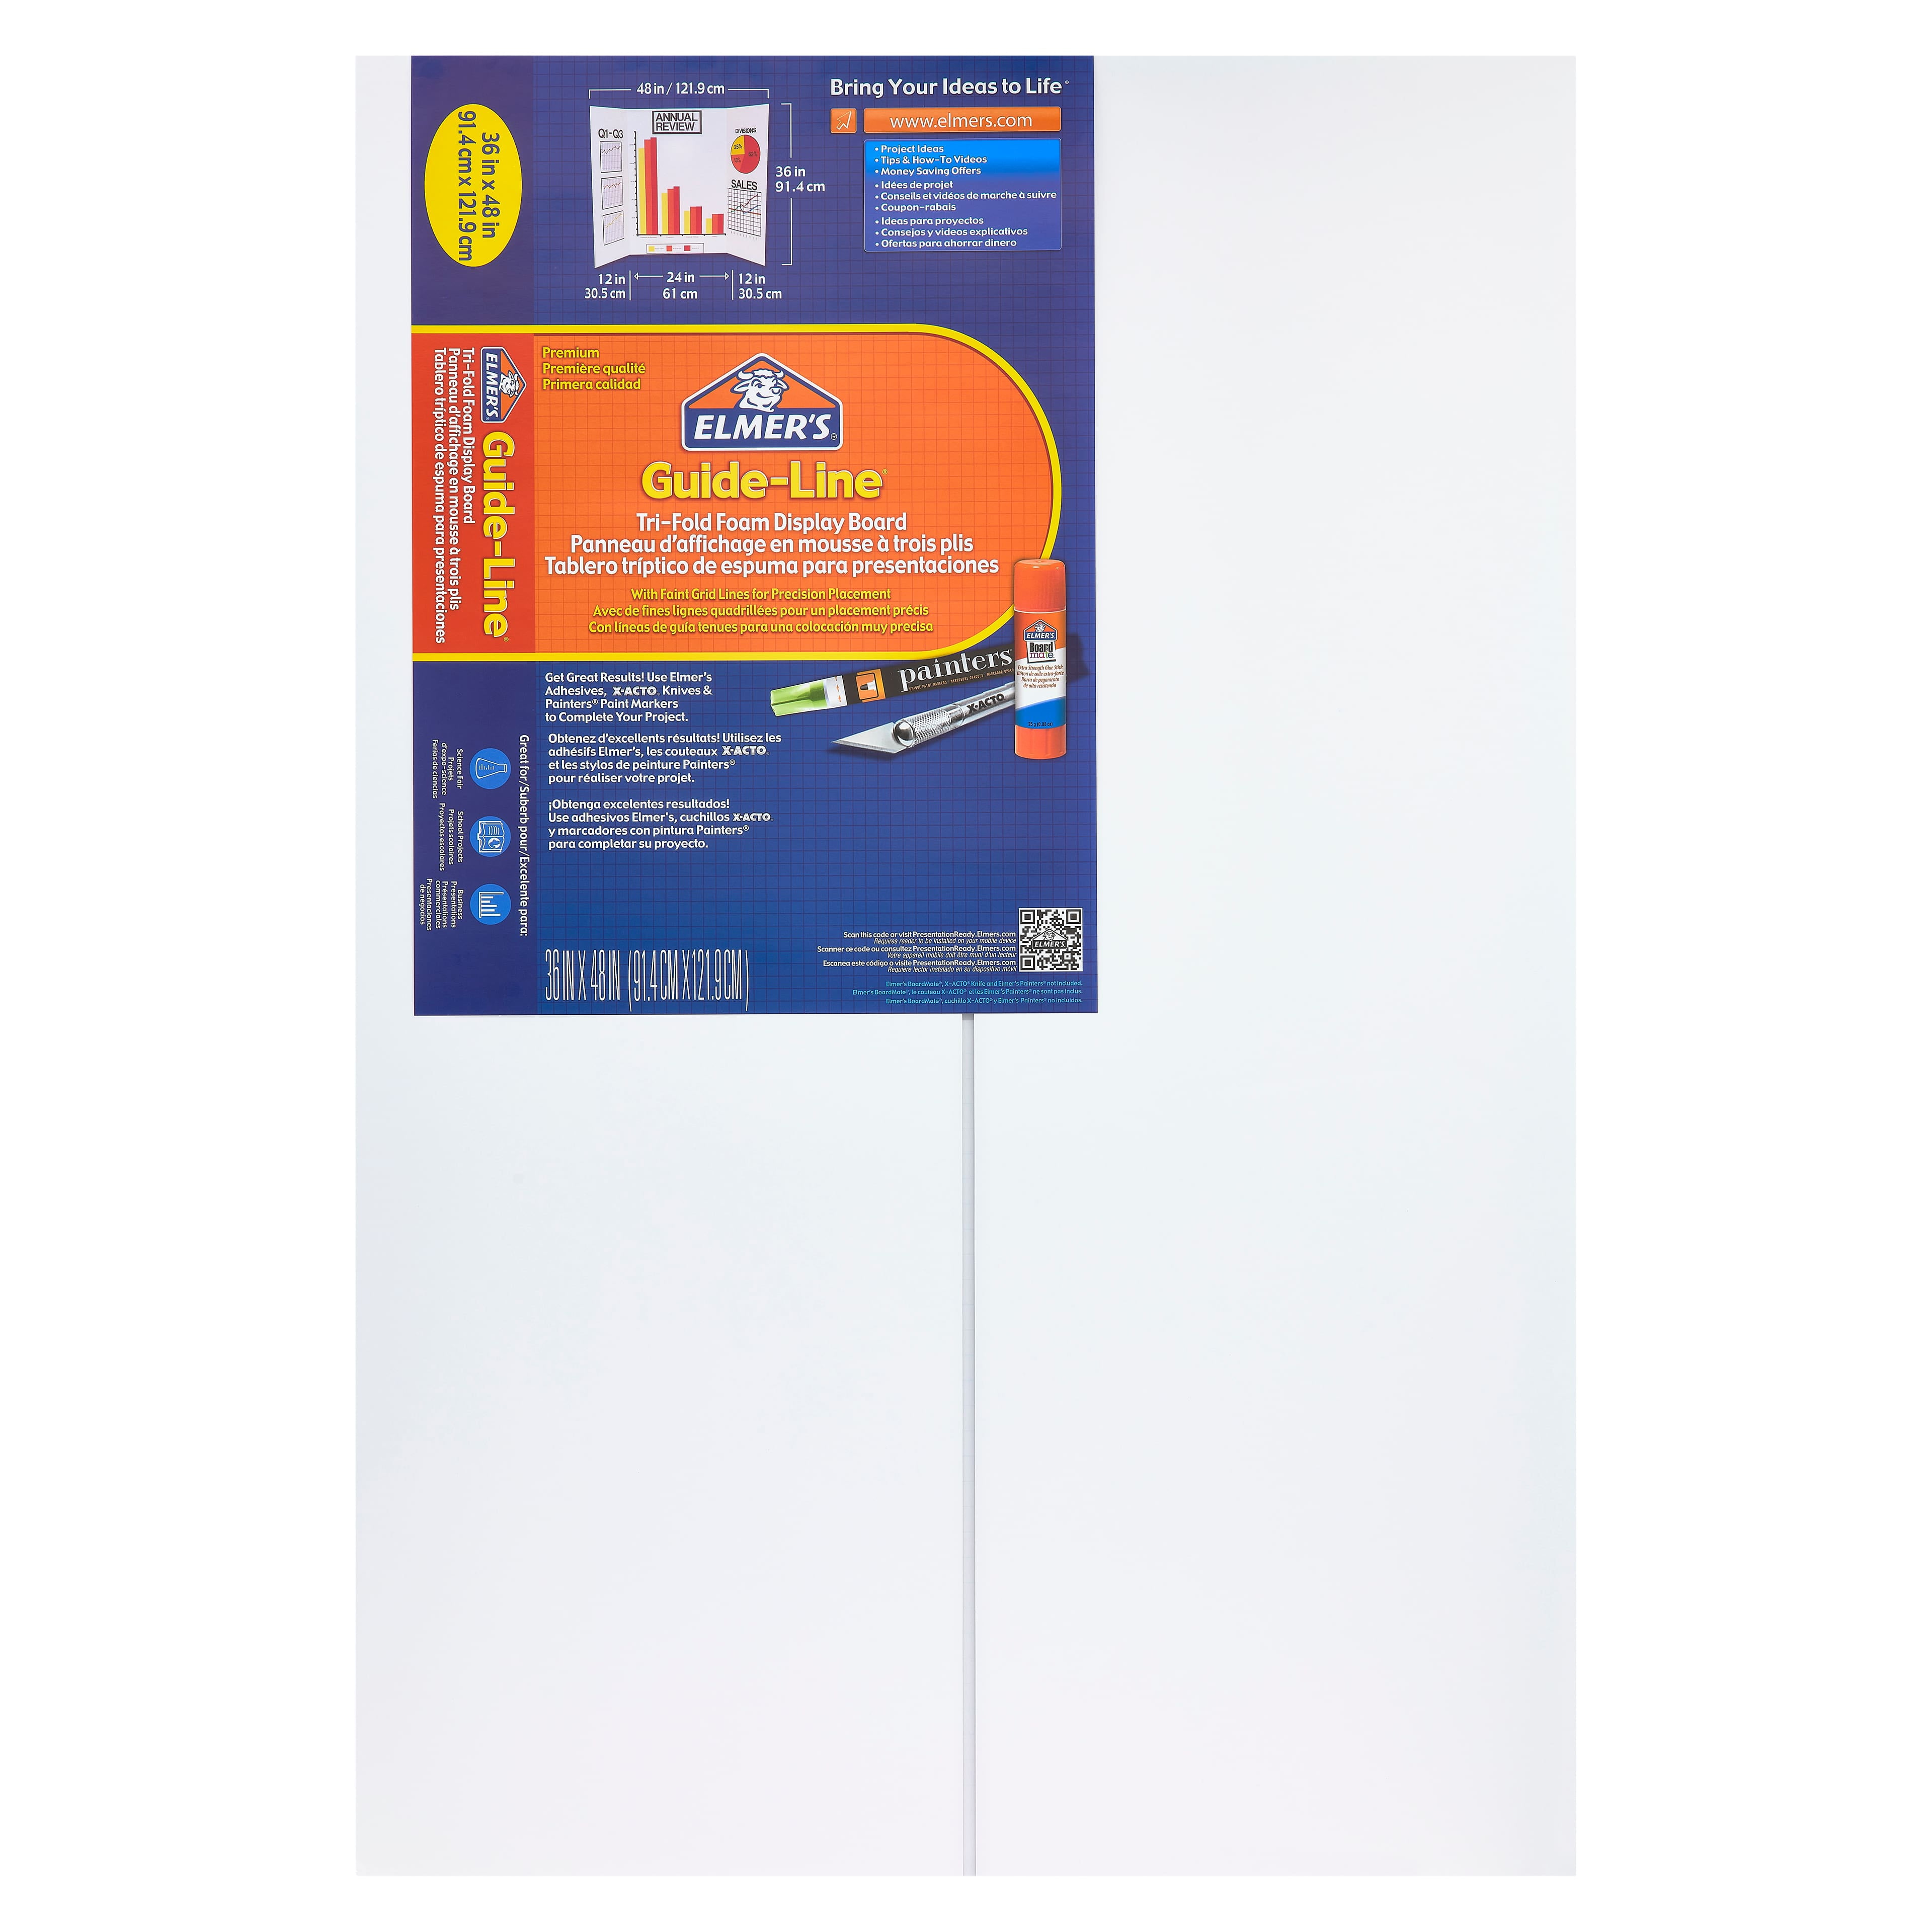 Elmer's 730-204 Board Mate Science Fair Project Titles, White  Repositionable Self-adhesive Labels, Set Includes 9 Project Titles + 1  Blank Title, Pack